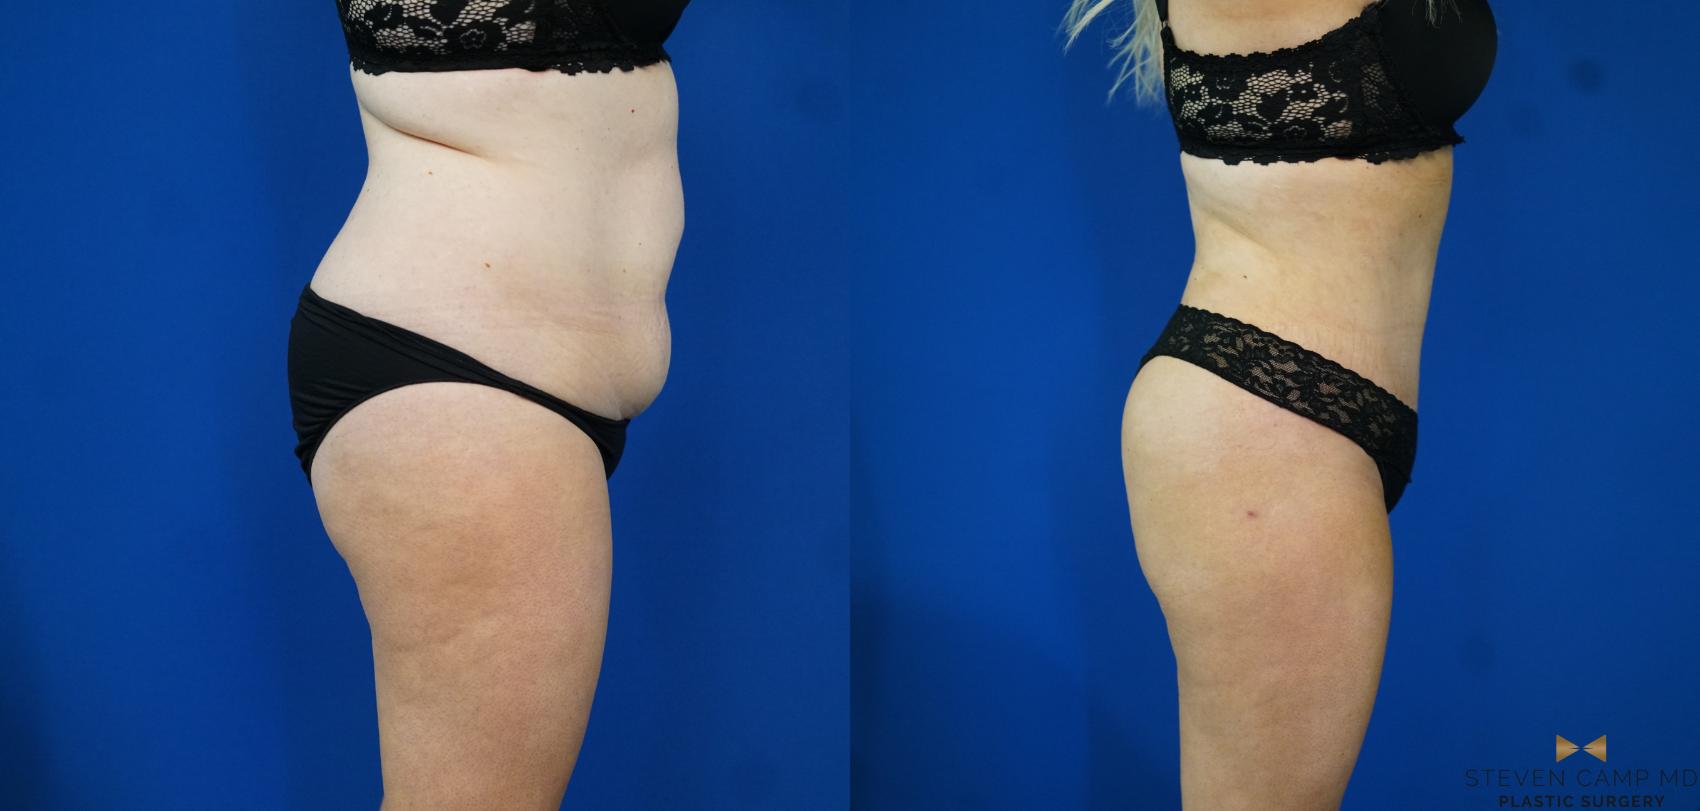 Tummy Tuck Before & After Photo | Fort Worth, Texas | Steven Camp MD Plastic Surgery